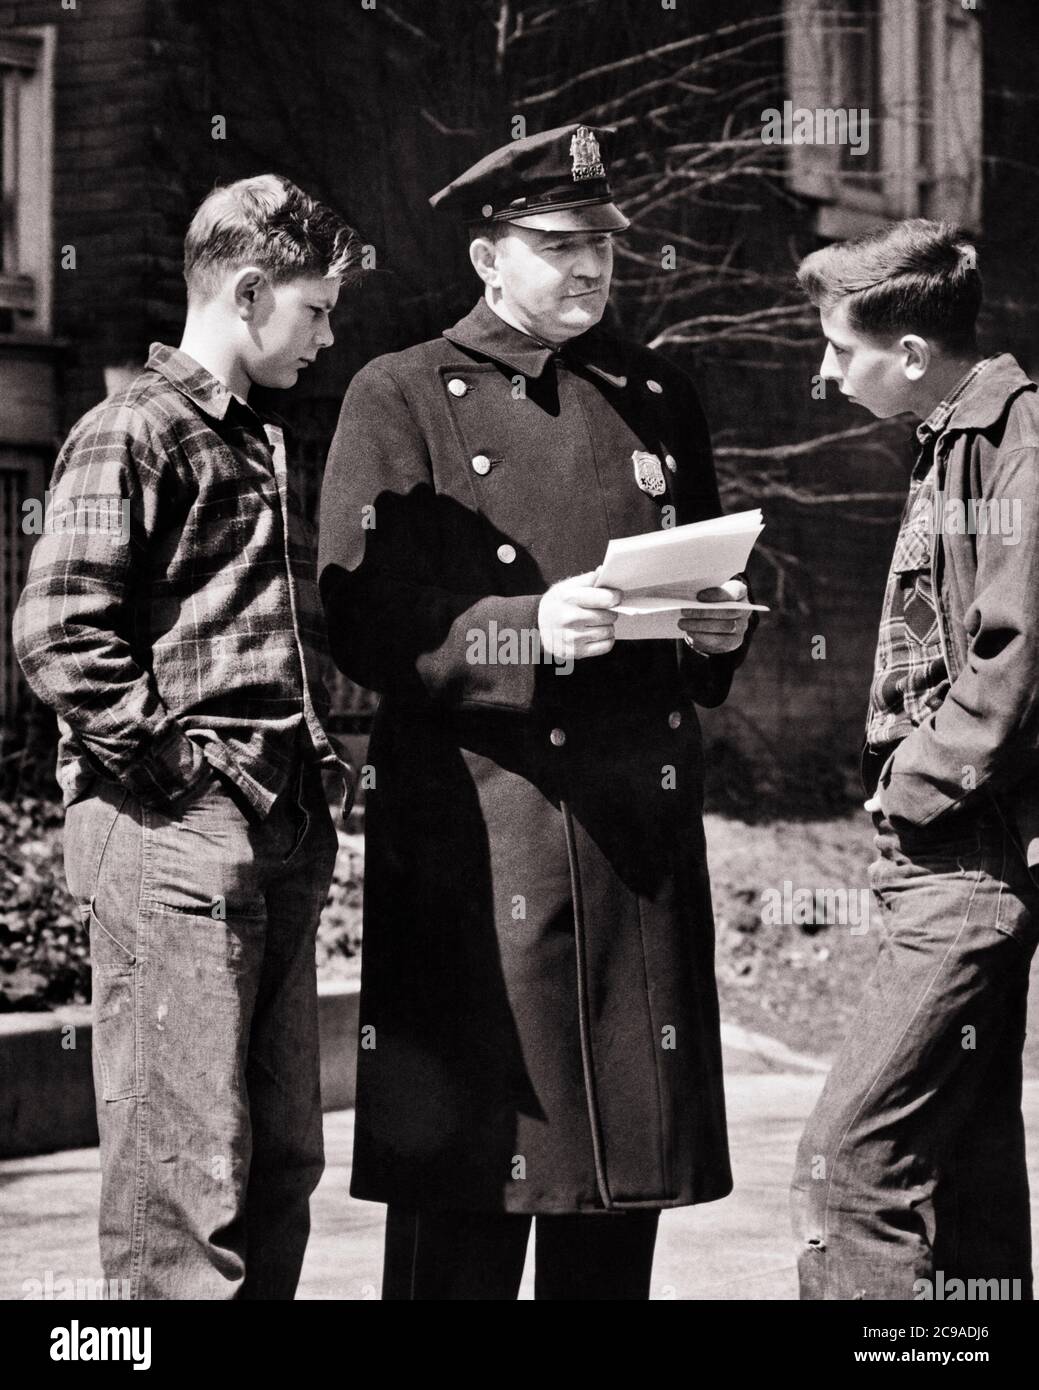 1940s 1950s TWO DEAD END TEENAGE BOYS ON THE STREET CONFRONTED BY POLICE OFFICER READING TRUANCY LETTER SUMMONS RULES WARRANT - w915 HAR001 HARS JUVENILE FEAR COMMUNICATION SERVE FRIEND LIFESTYLE COPY SPACE FRIENDSHIP HALF-LENGTH PERSONS CARING MALES ORDER OFFICER TEENAGE BOY B&W COP PROTECT AND SERVE PROTECT AND LEADERSHIP POWERFUL BY ON THE AUTHORITY OCCUPATIONS RULES UNIFORMS DELINQUENT FRIENDLY TEENAGED CONFRONTED OFFICERS POLICEMEN BEHAVIOR COOPERATION COPS ENFORCEMENT JUVENILES TRUANT BADGE BADGES BLACK AND WHITE CAUCASIAN ETHNICITY HAR001 OLD FASHIONED Stock Photo